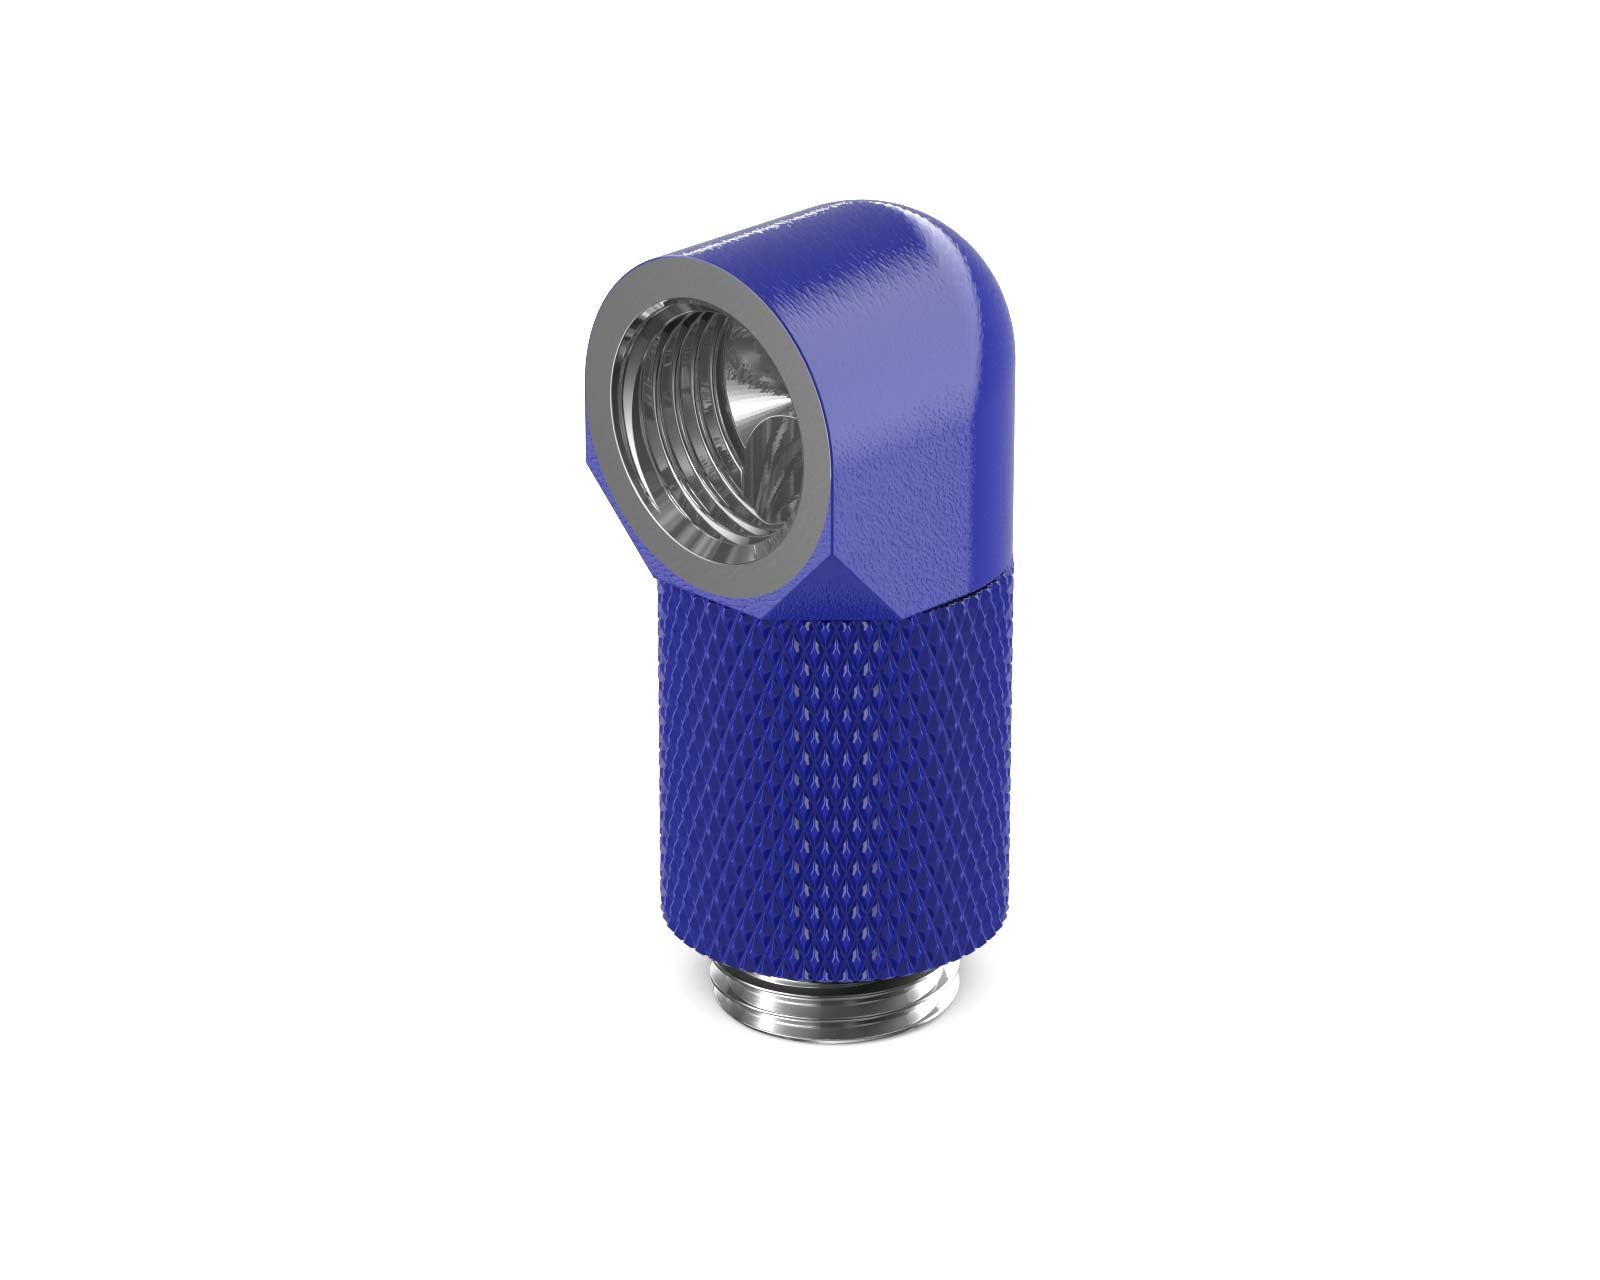 PrimoChill Male to Female G 1/4in. 90 Degree SX Rotary 20mm Extension Elbow Fitting - PrimoChill - KEEPING IT COOL True Blue